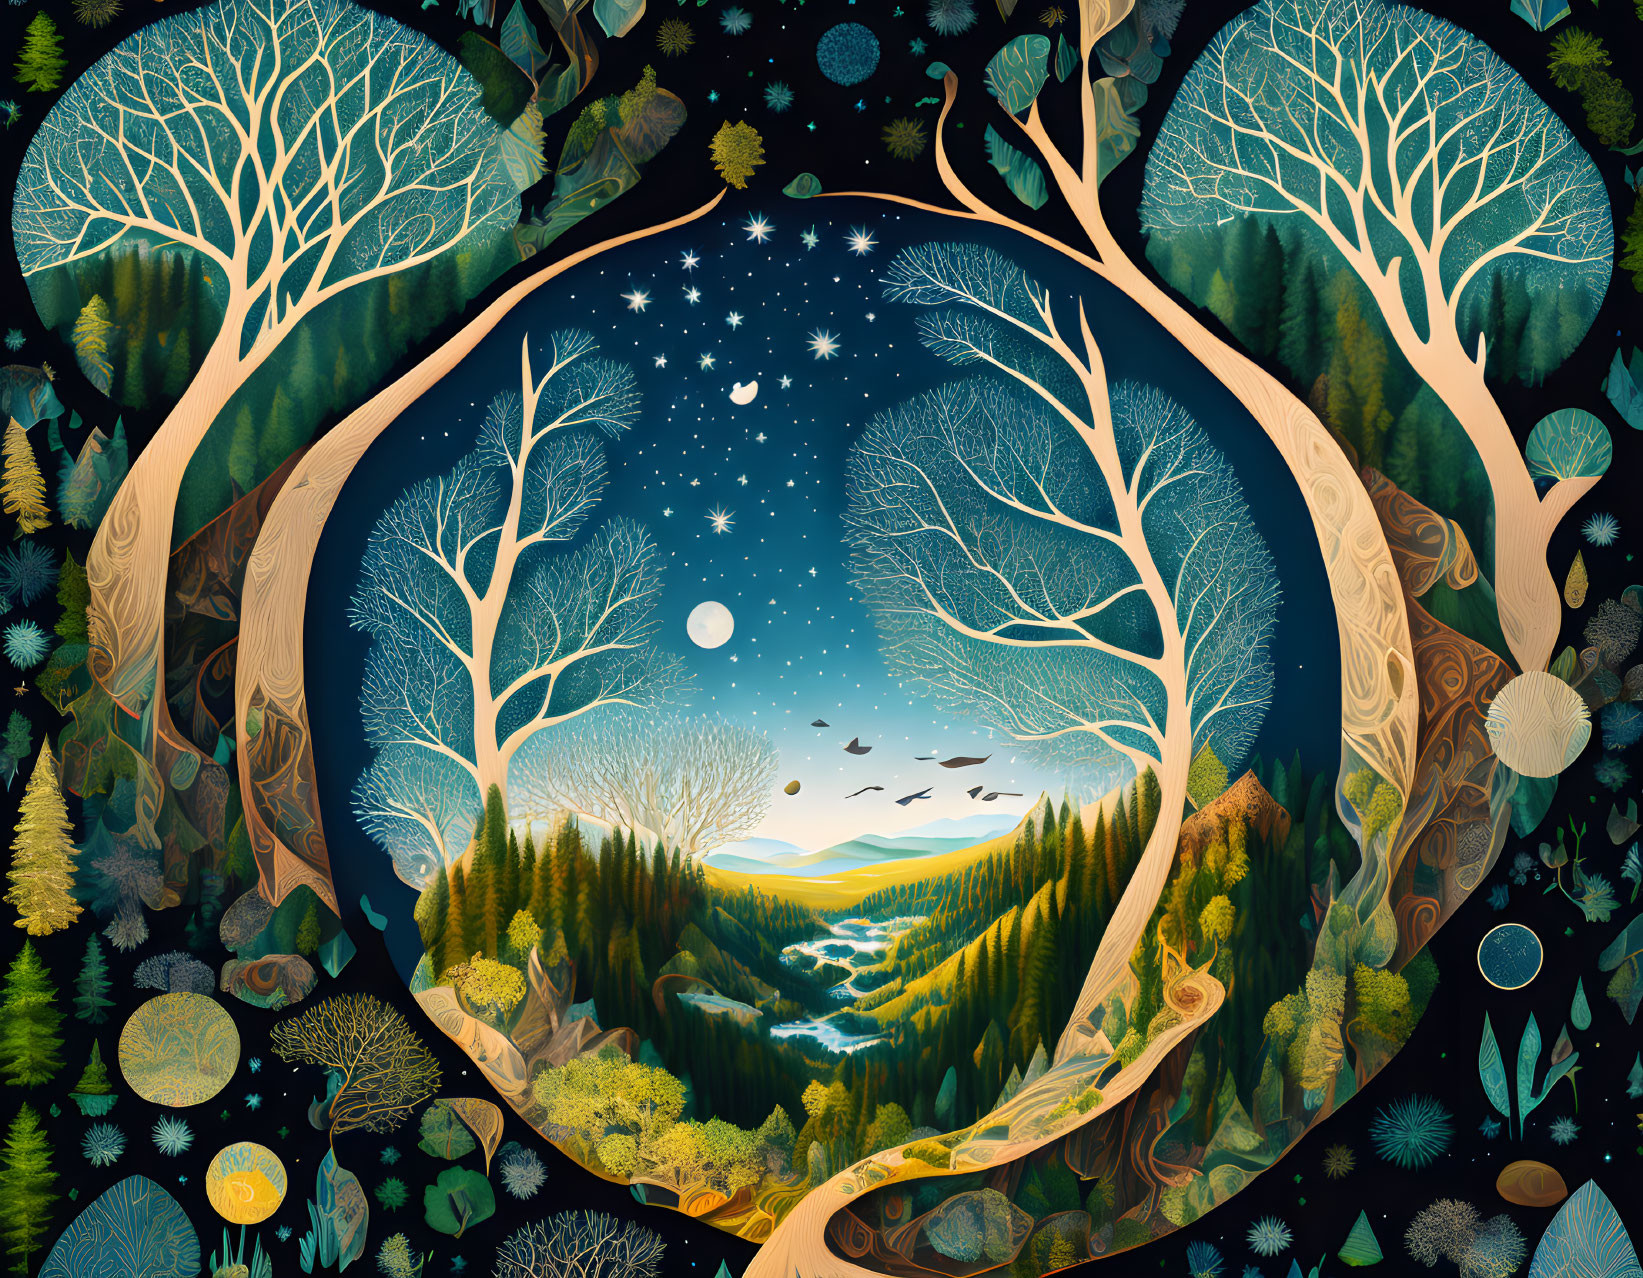 Circular forest scene transitioning from day to night with trees, river, and celestial elements.